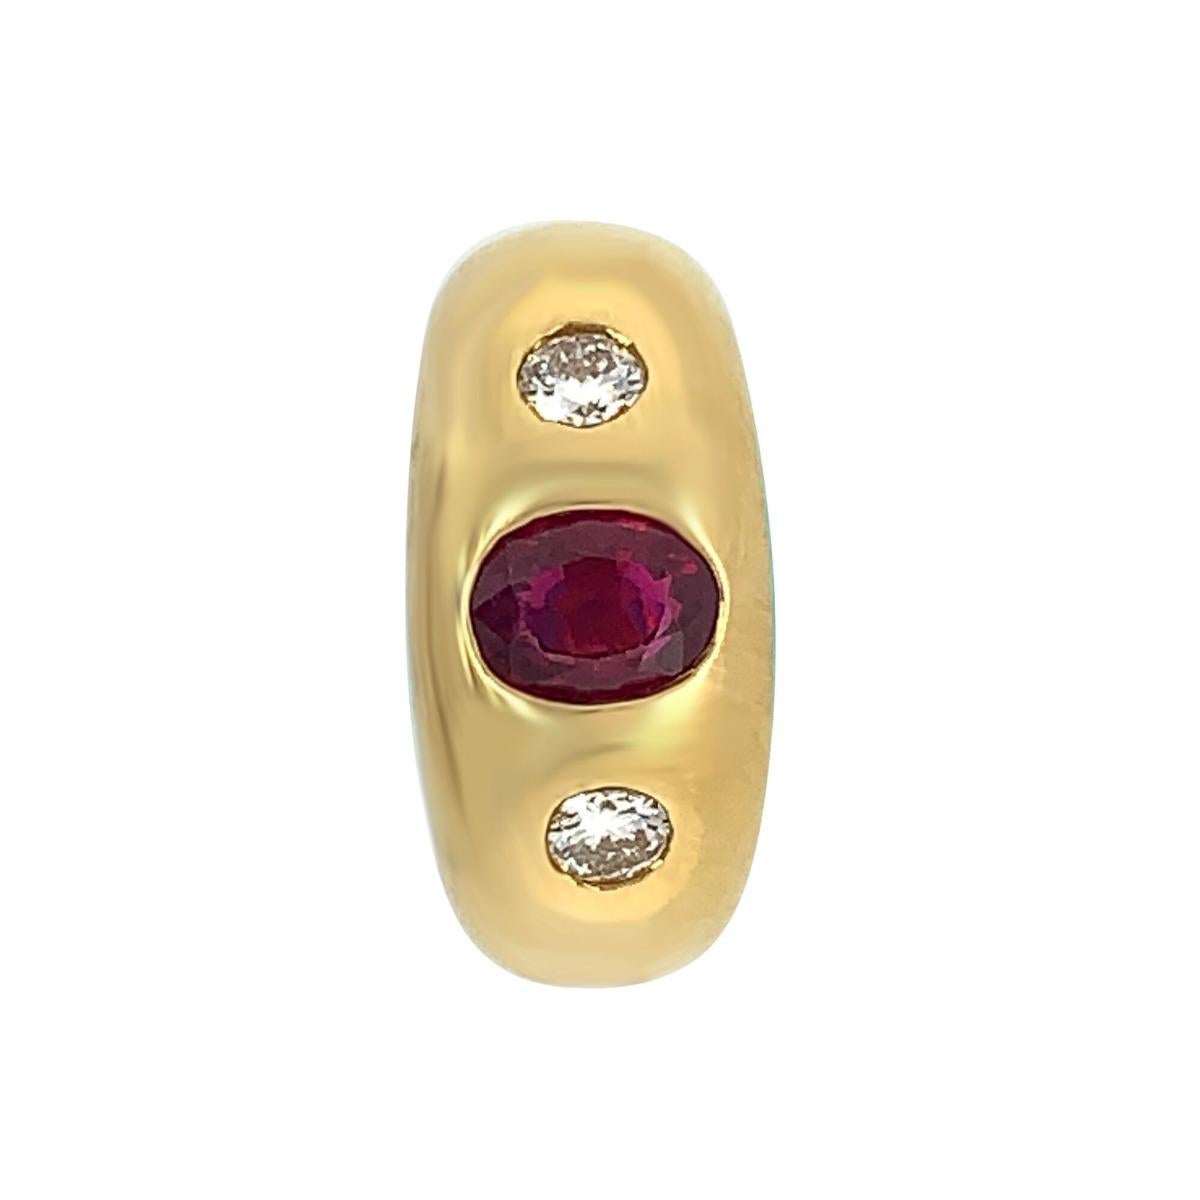 Metal: Gold
Condition: Excellent
Circa 1960s
Made in Italy
Gemstone: Diamond & Ruby 
Oval Ruby Weight: 2 CT
Diamond Weight: 0.30 CT
Ring Size: 6
Total Item Weight: 14.5 g